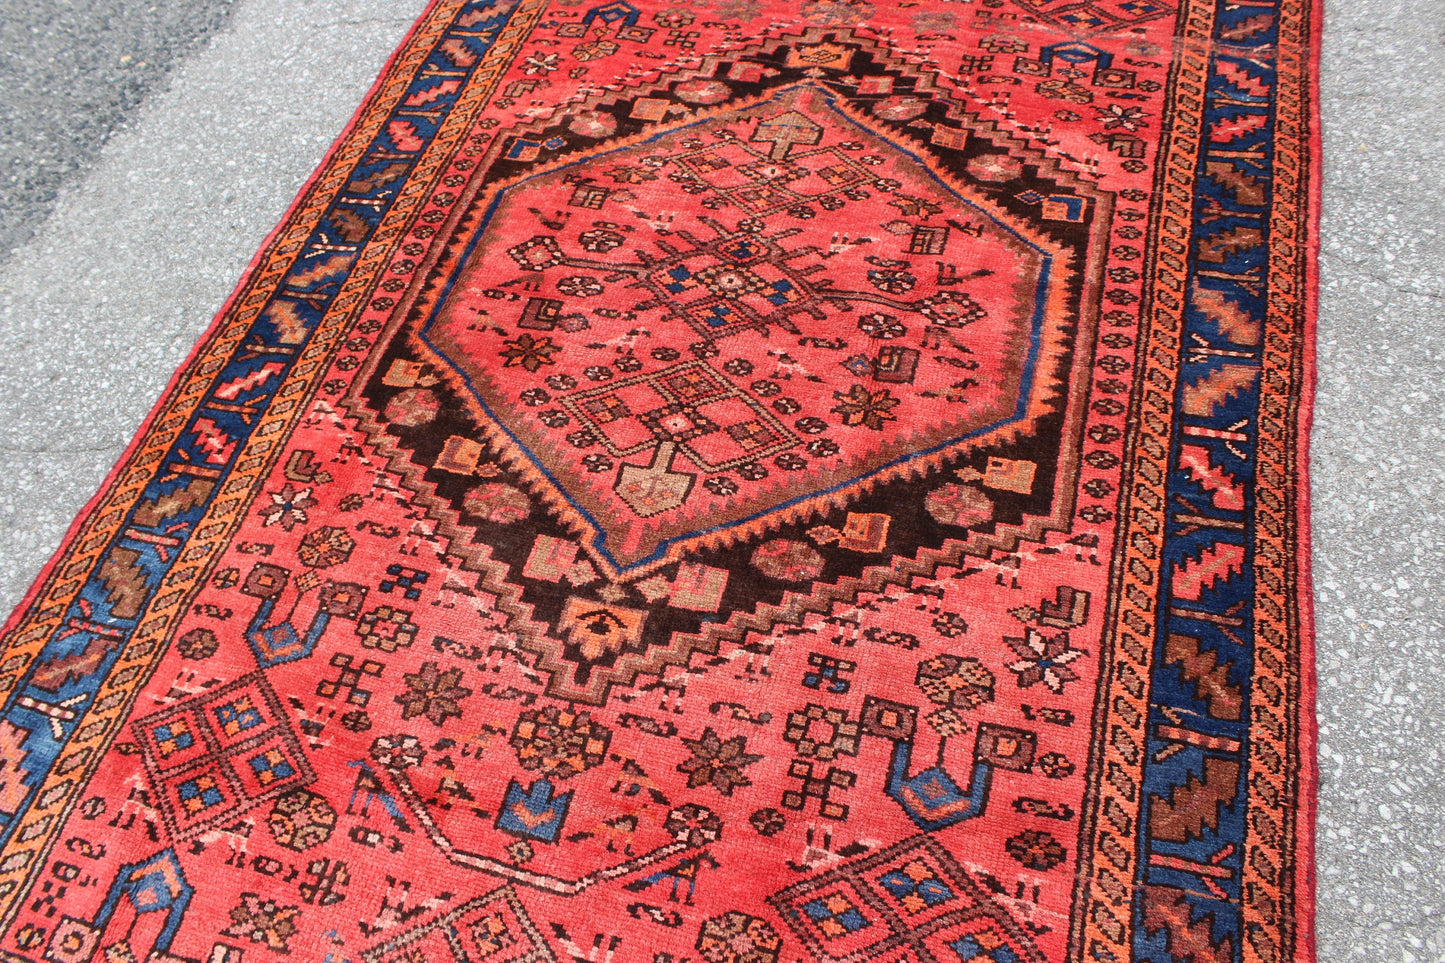 Coral Pink Handmade 4x6 Persian Rug with Blue Bordered Outline